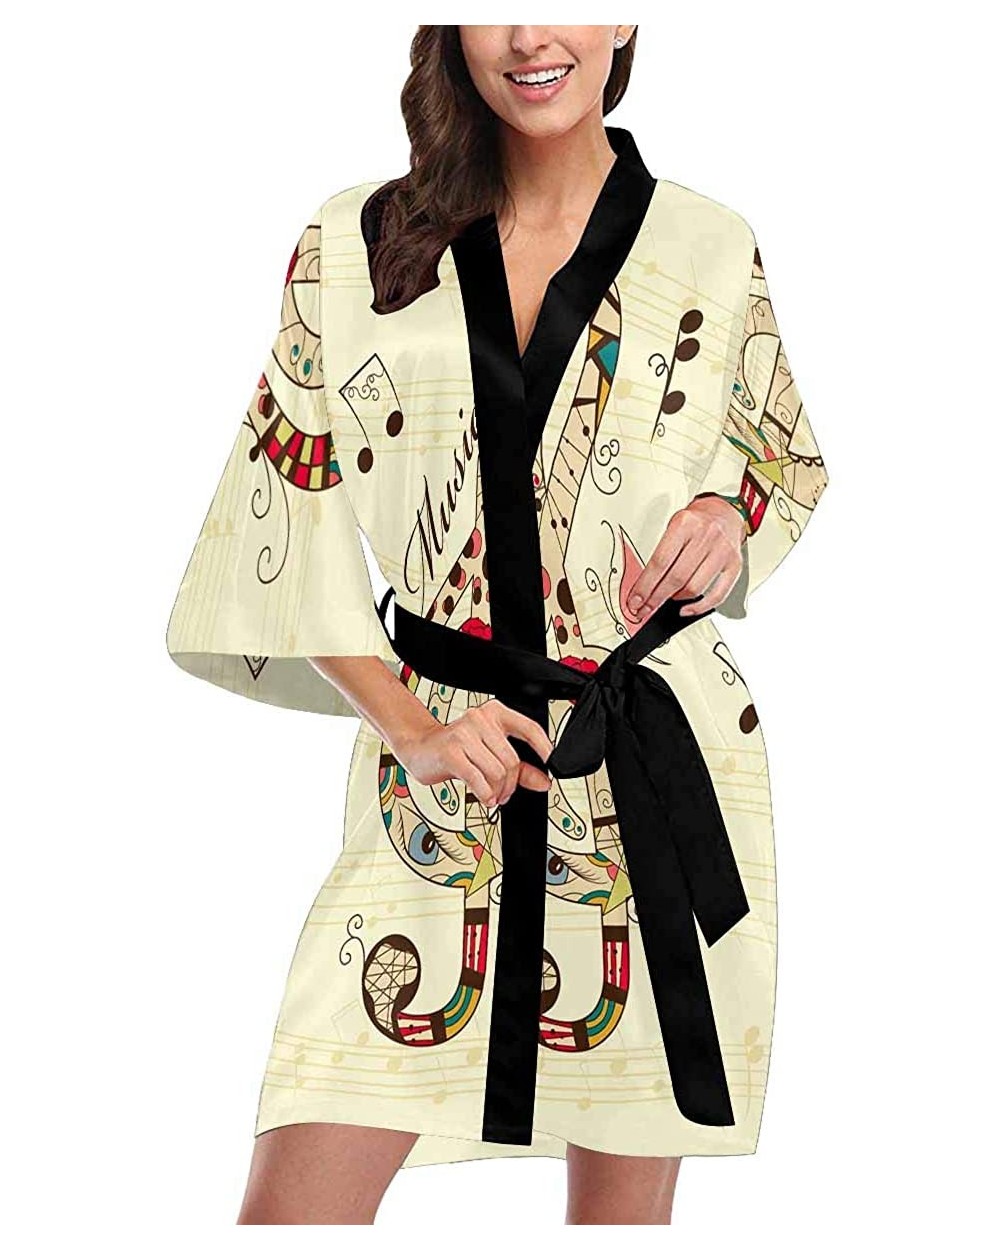 Custom Vintage Musical Treble Clef Women Kimono Robes Beach Cover Up for Parties Wedding (XS-2XL) - Multi 1 - C1194S3RT72 $77...